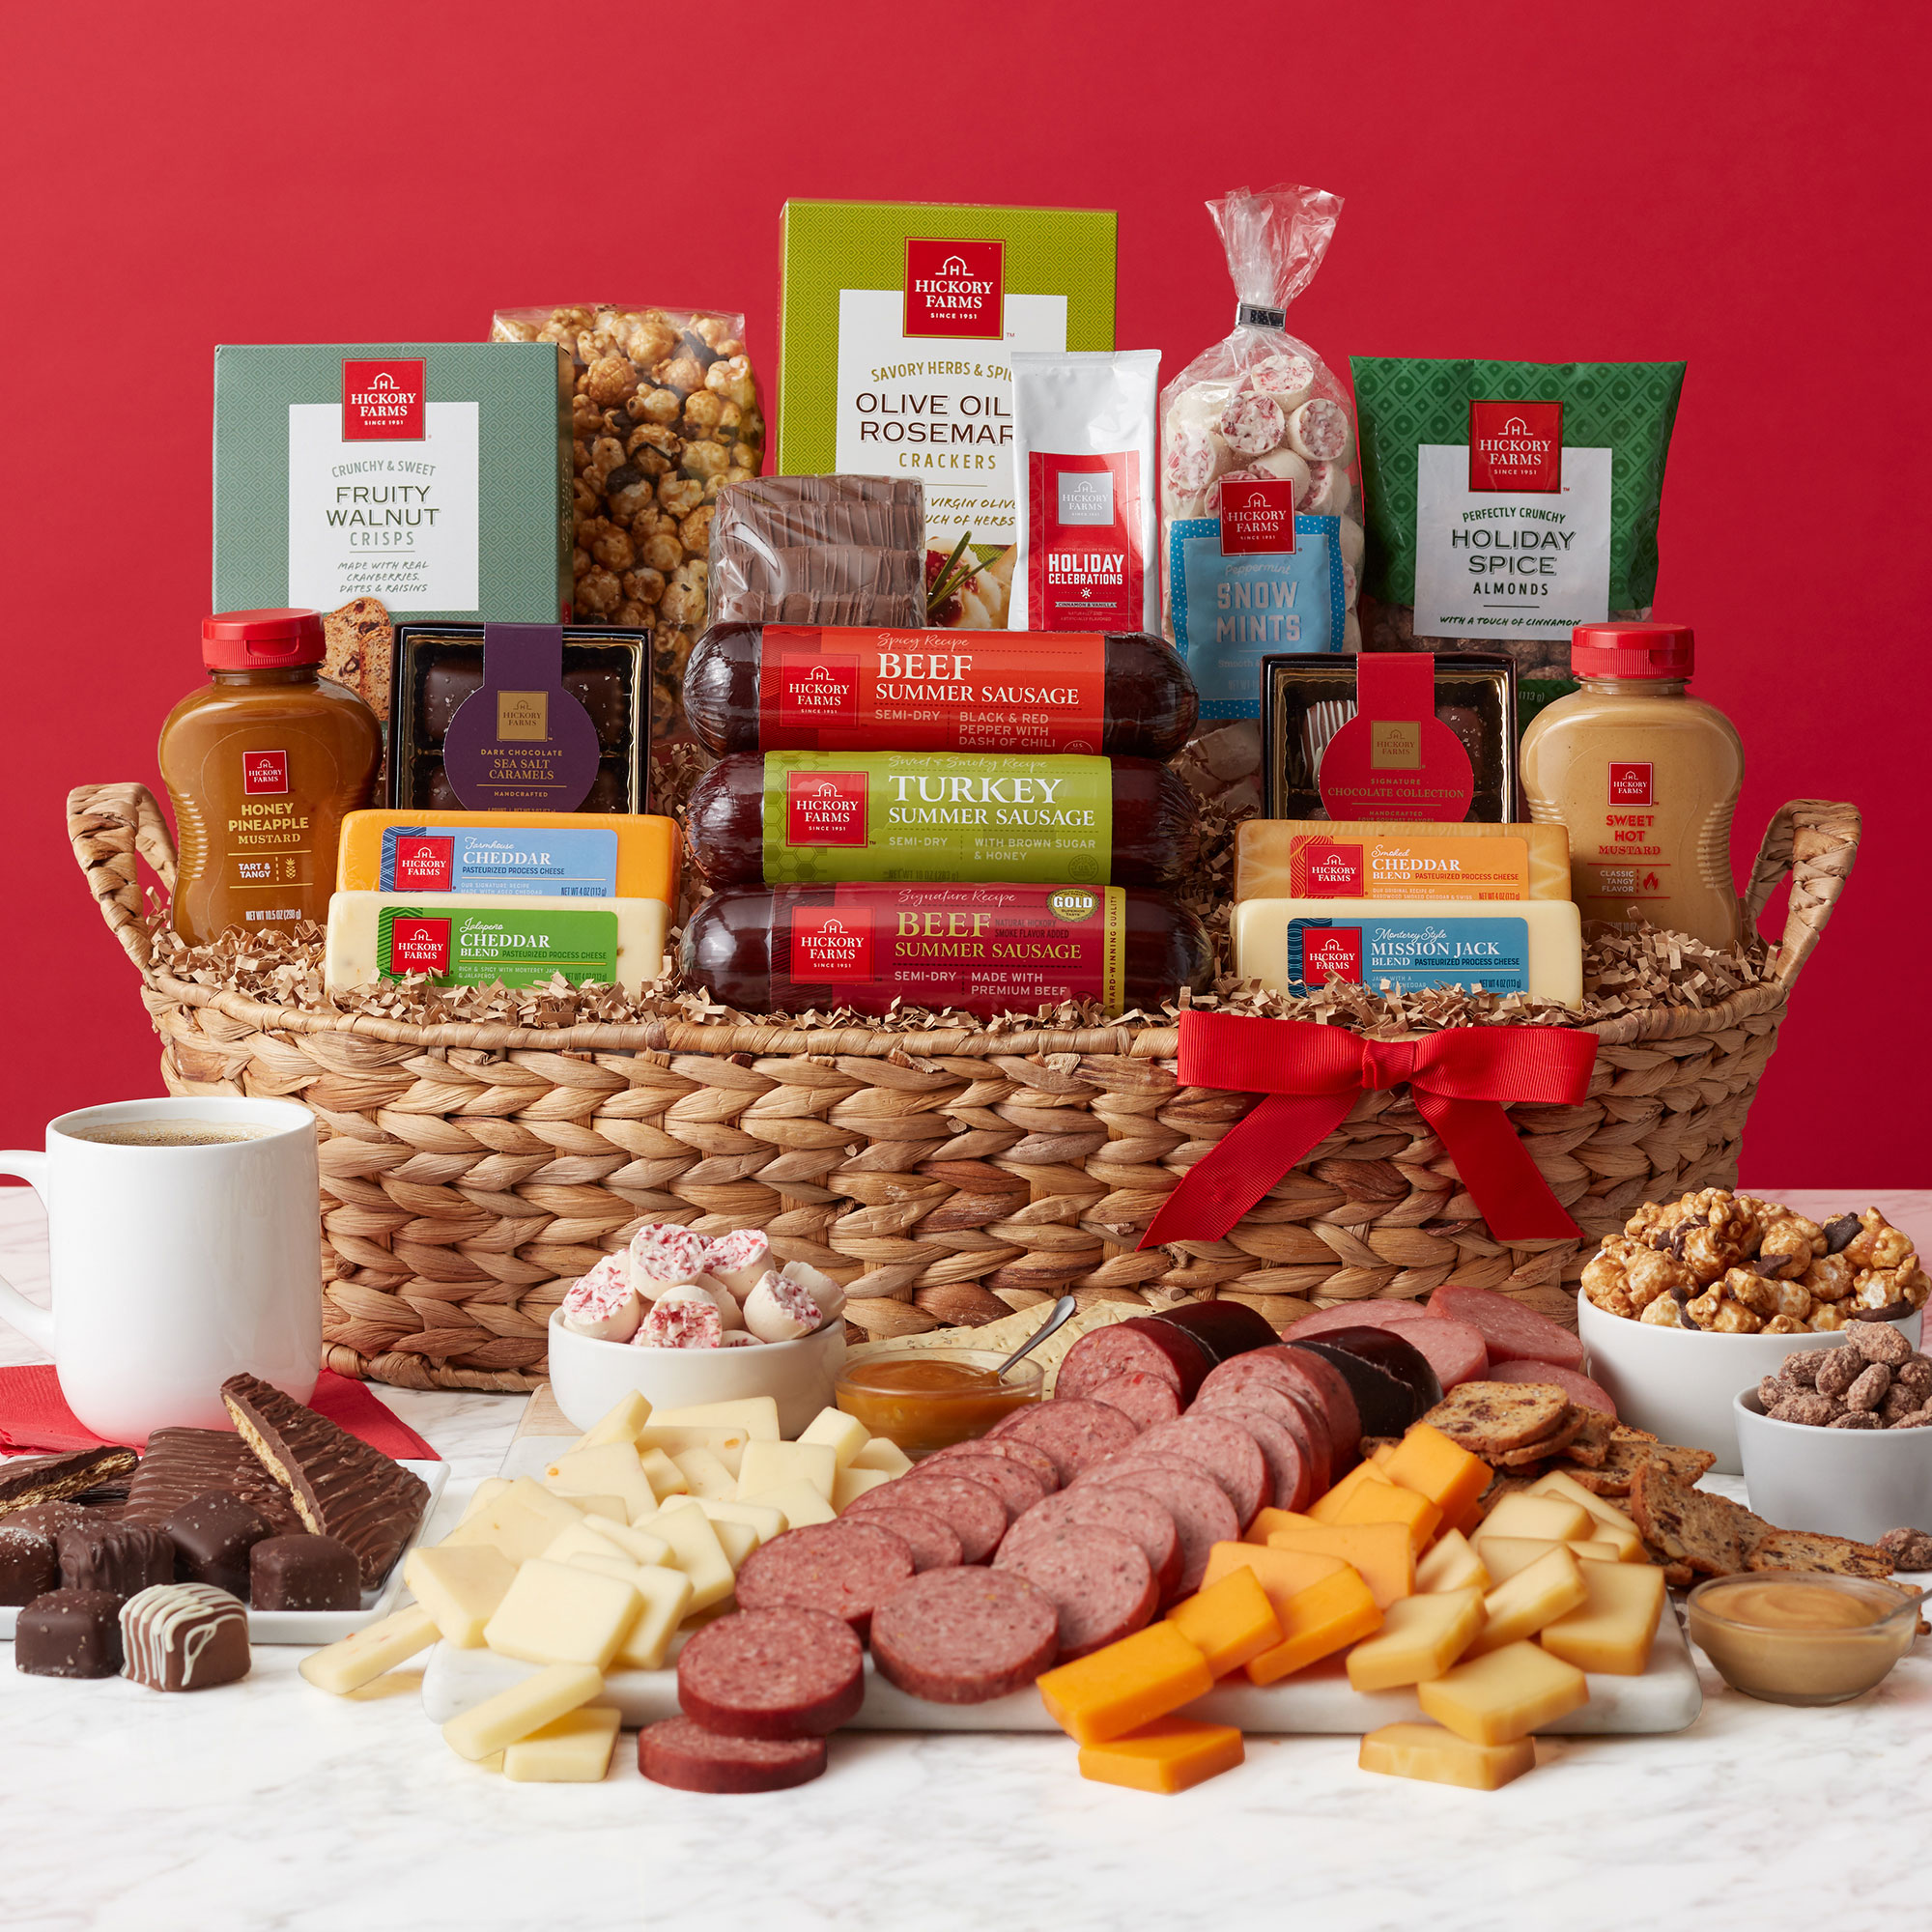 https://www.hickoryfarms.com/on/demandware.static/-/Sites-Web-Master-Catalog/default/dw4004508c/images/products/grand-holiday-gift-basket-new-014227-1.jpg